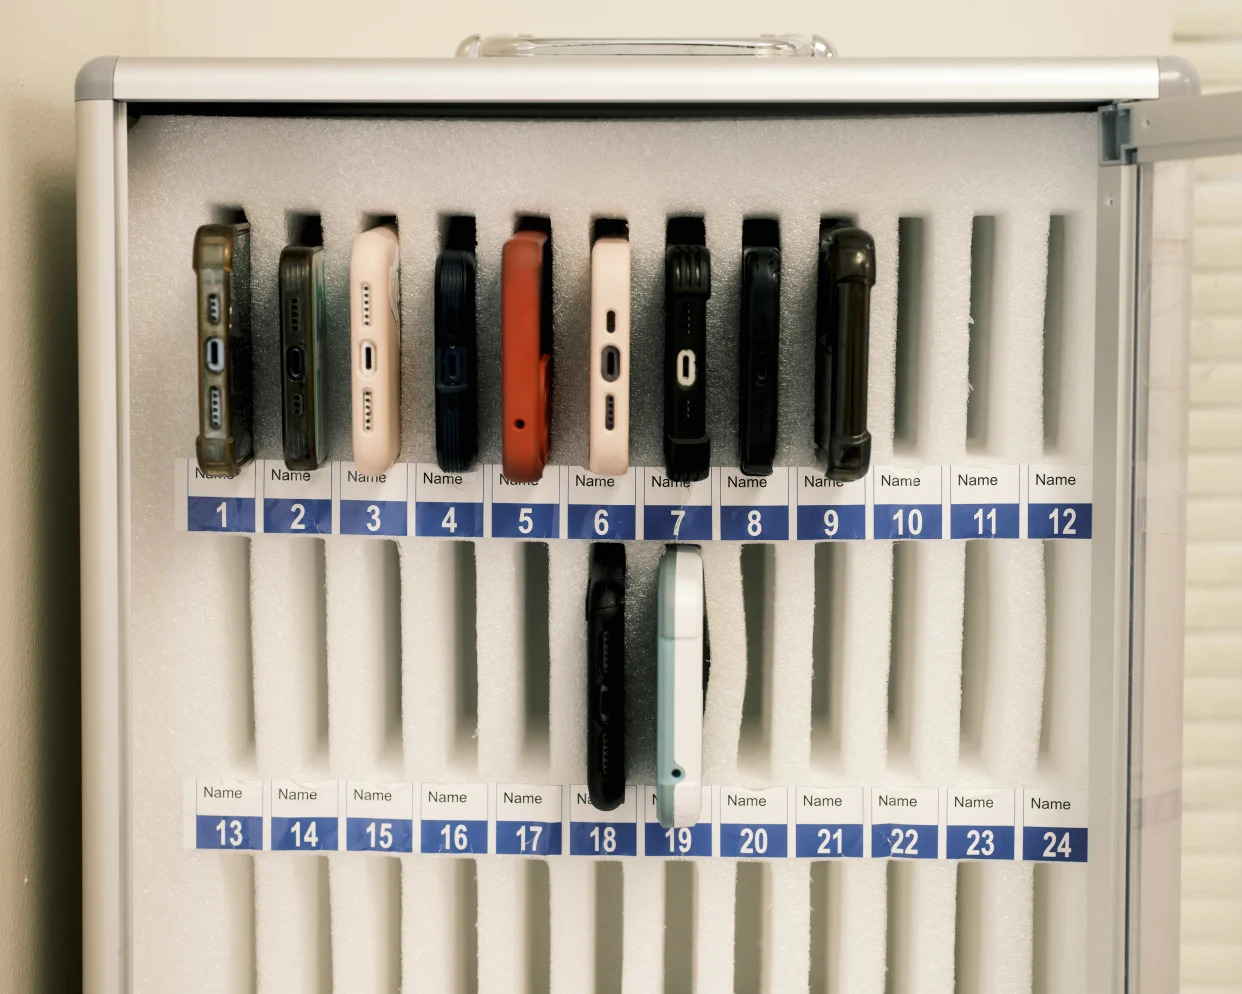 Confiscated cellphones stored in a specialized safe at Timber Creek High School in Orlando, Fla. on Oct. 6, 2023. (Zack Wittman/The New York Times)